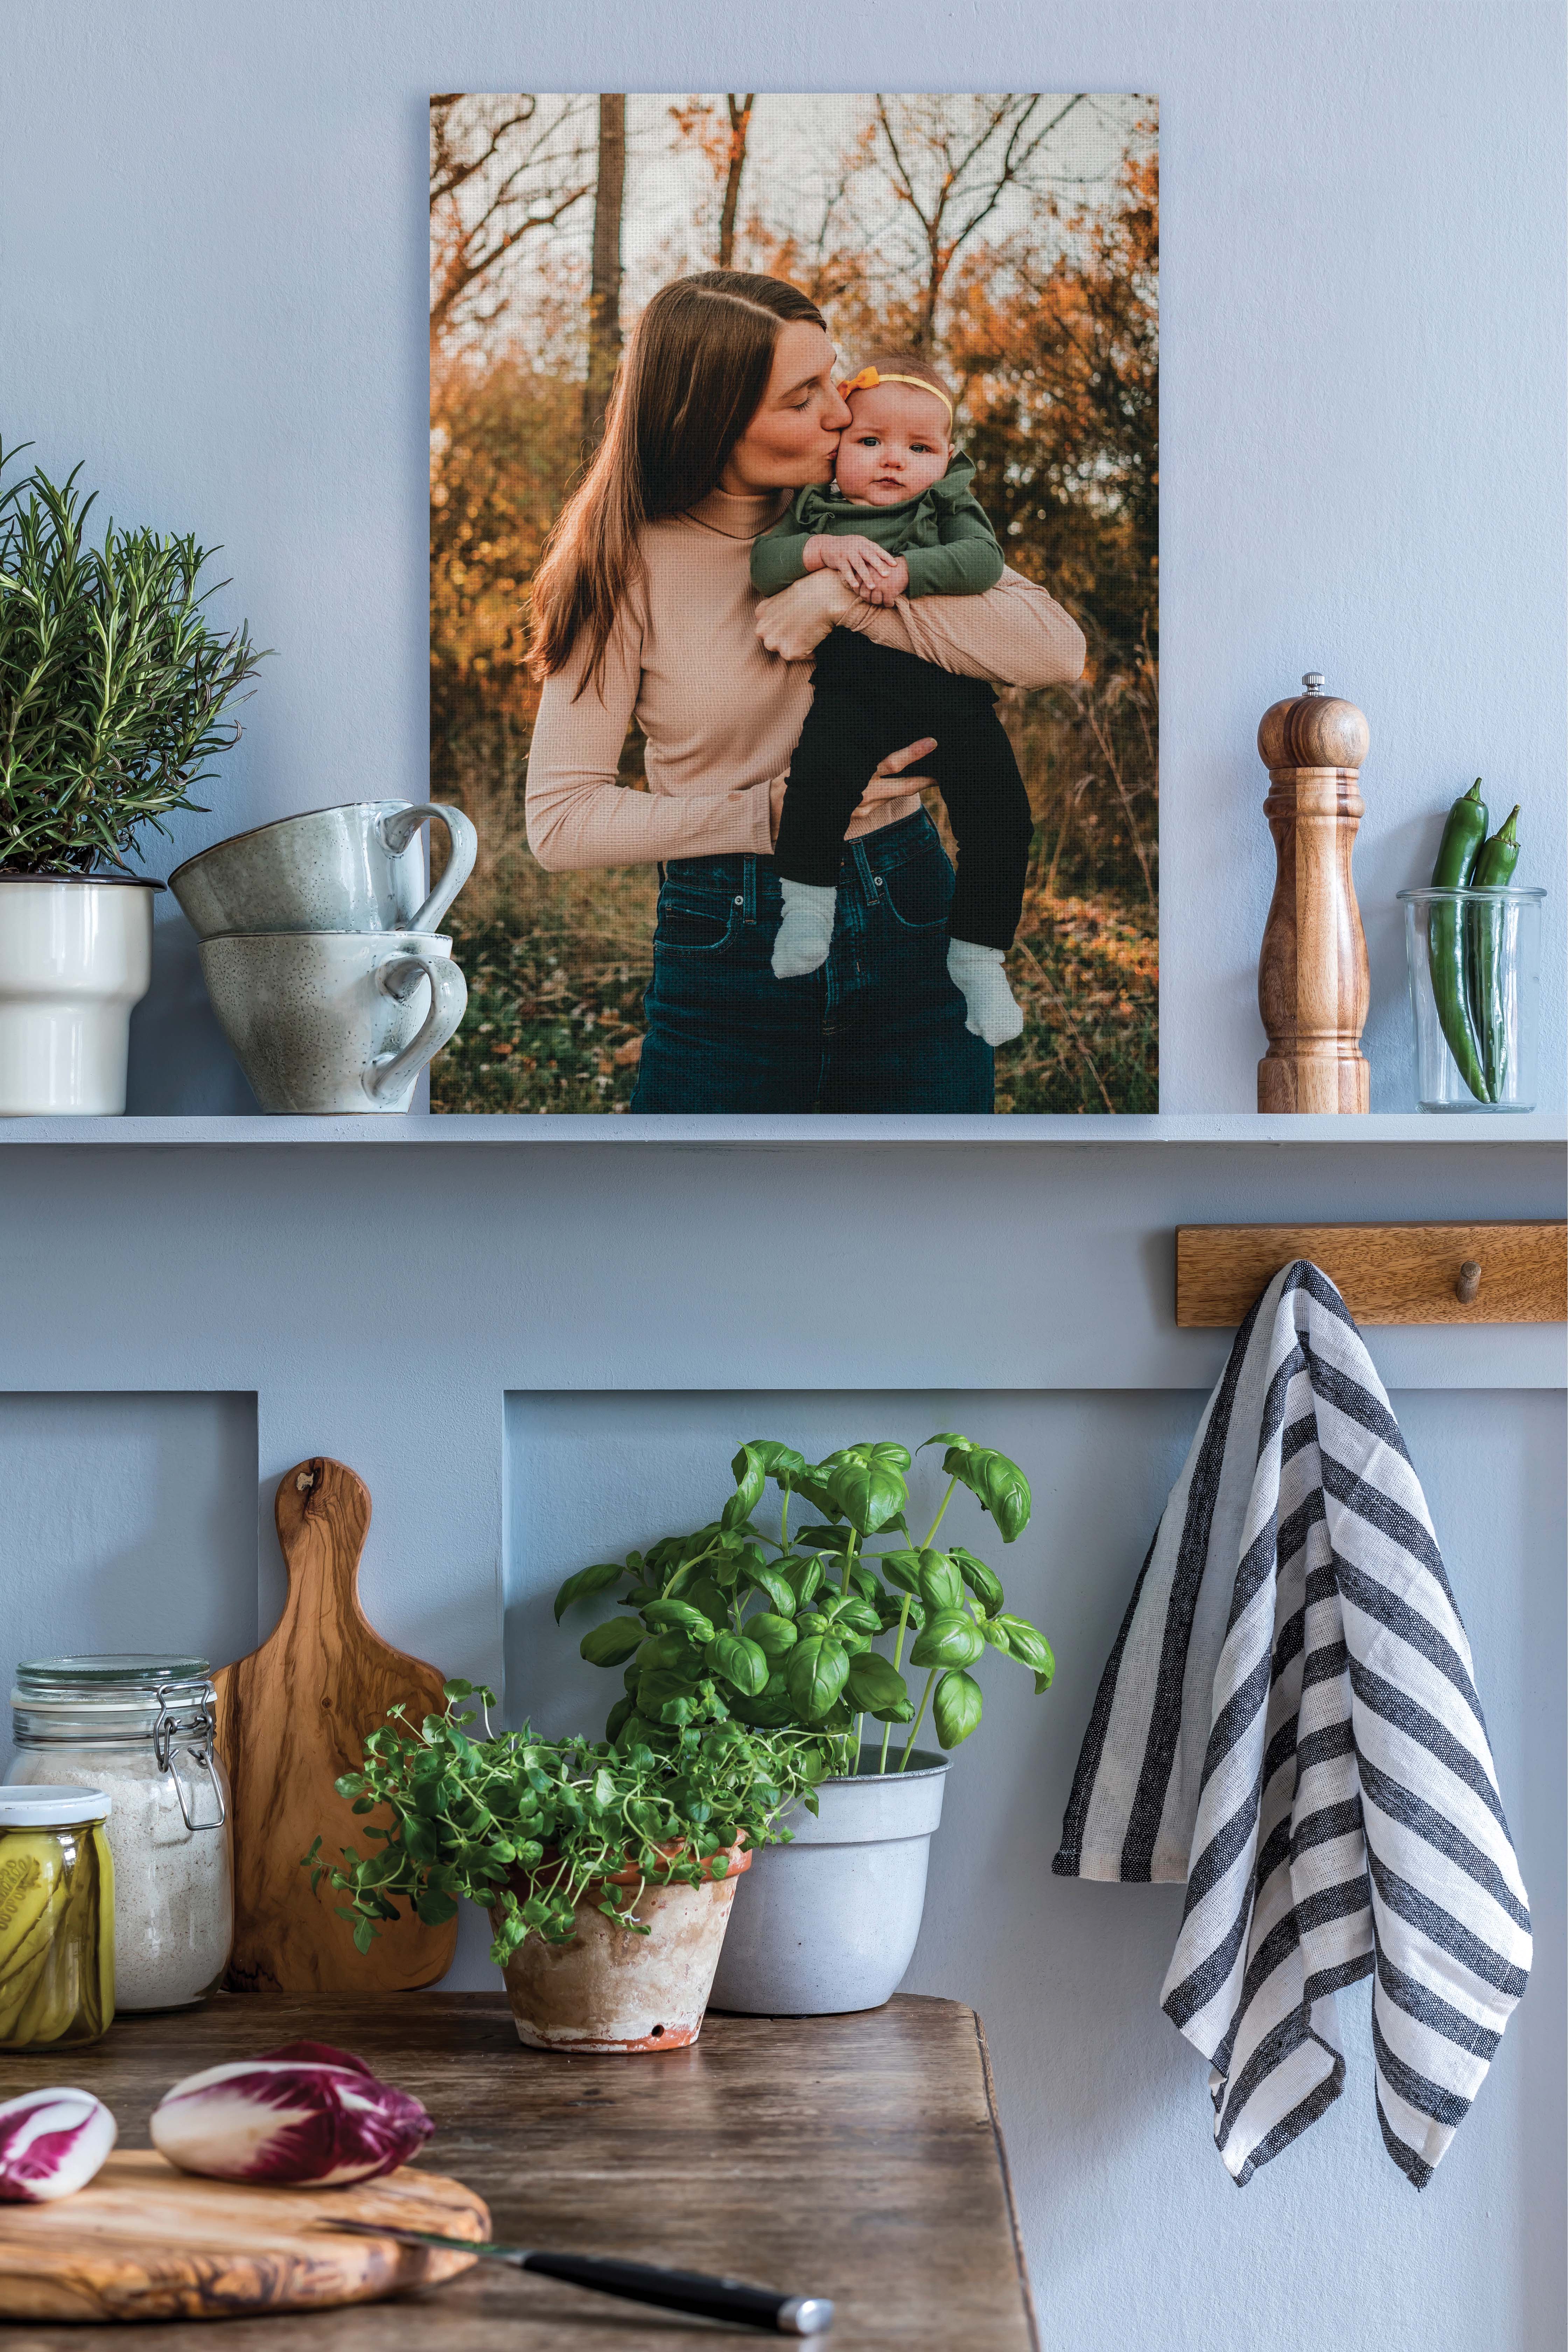 Canvas print of mother and daughter on shelf in kitchen